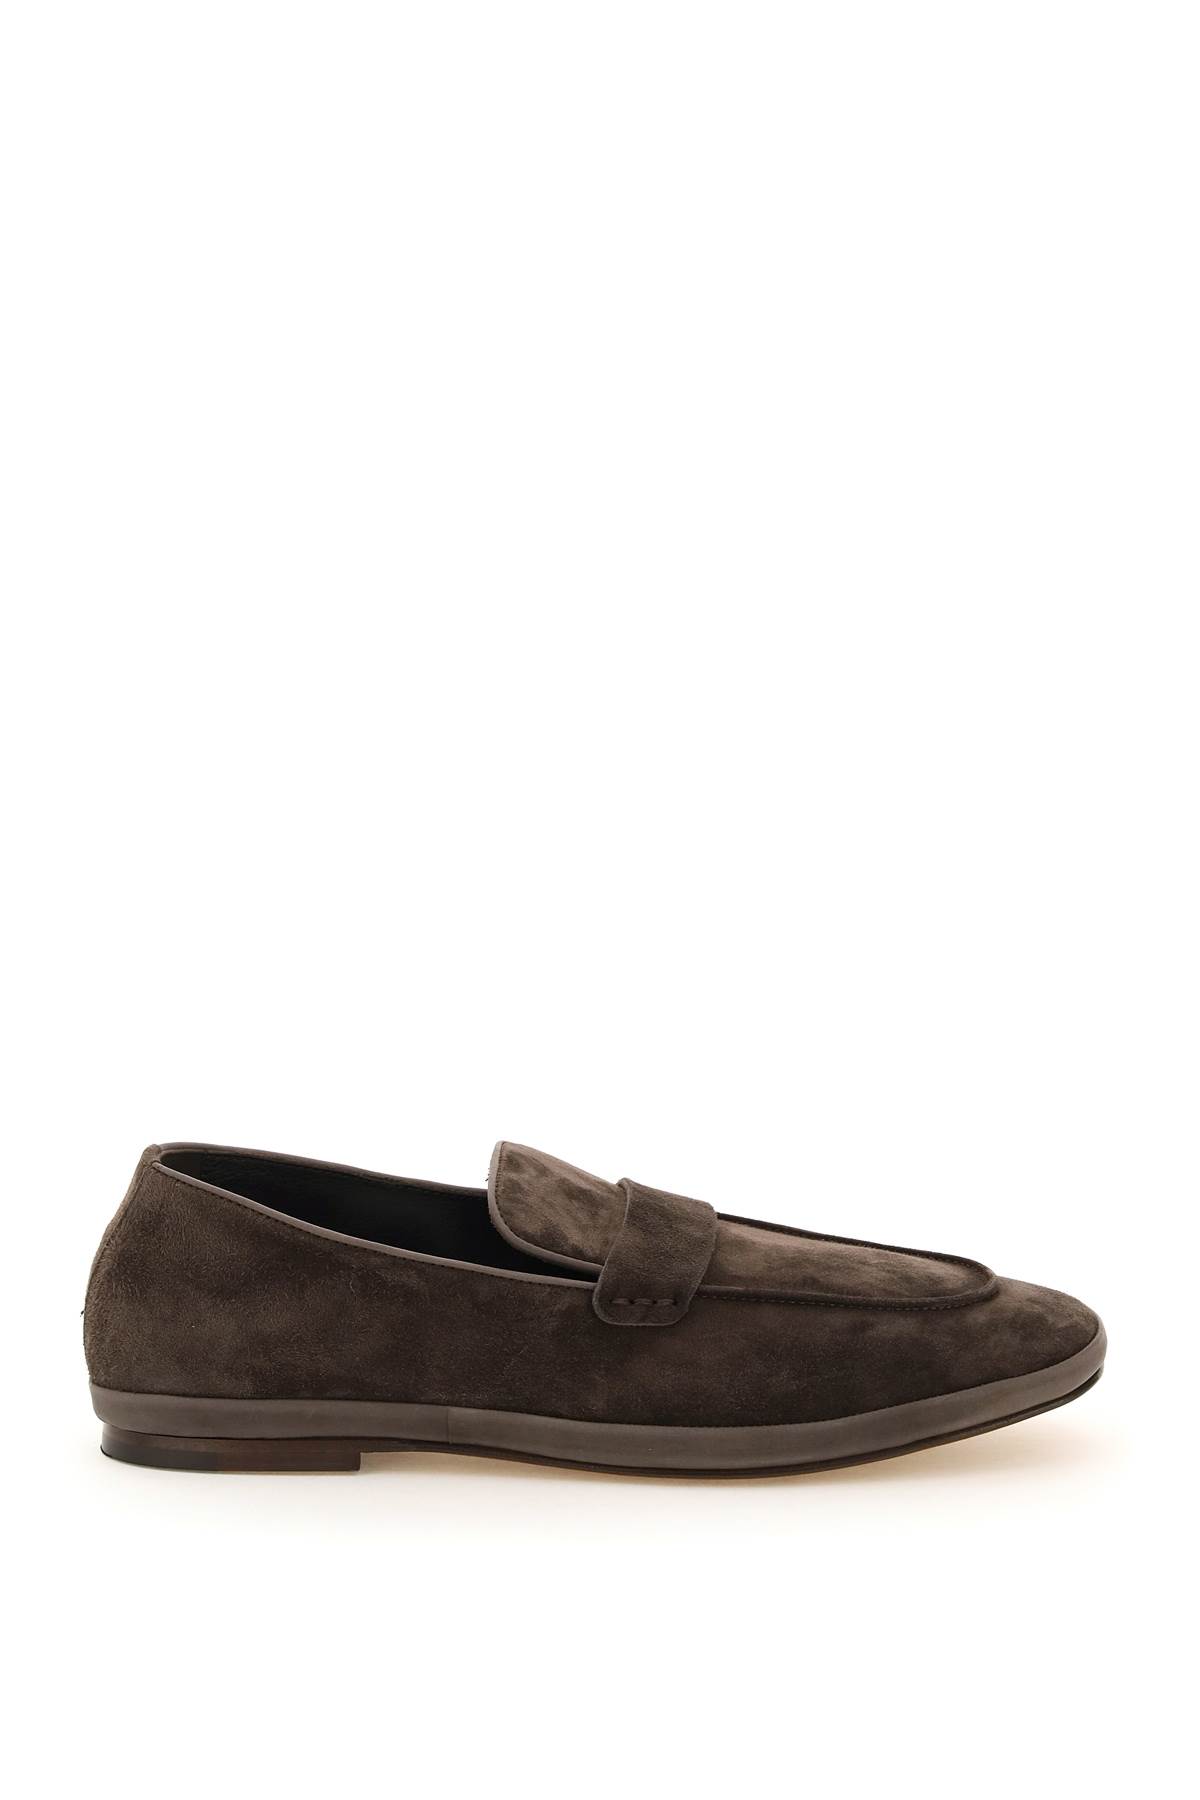 Henderson Baracco Ernest Suede Leather Loafers